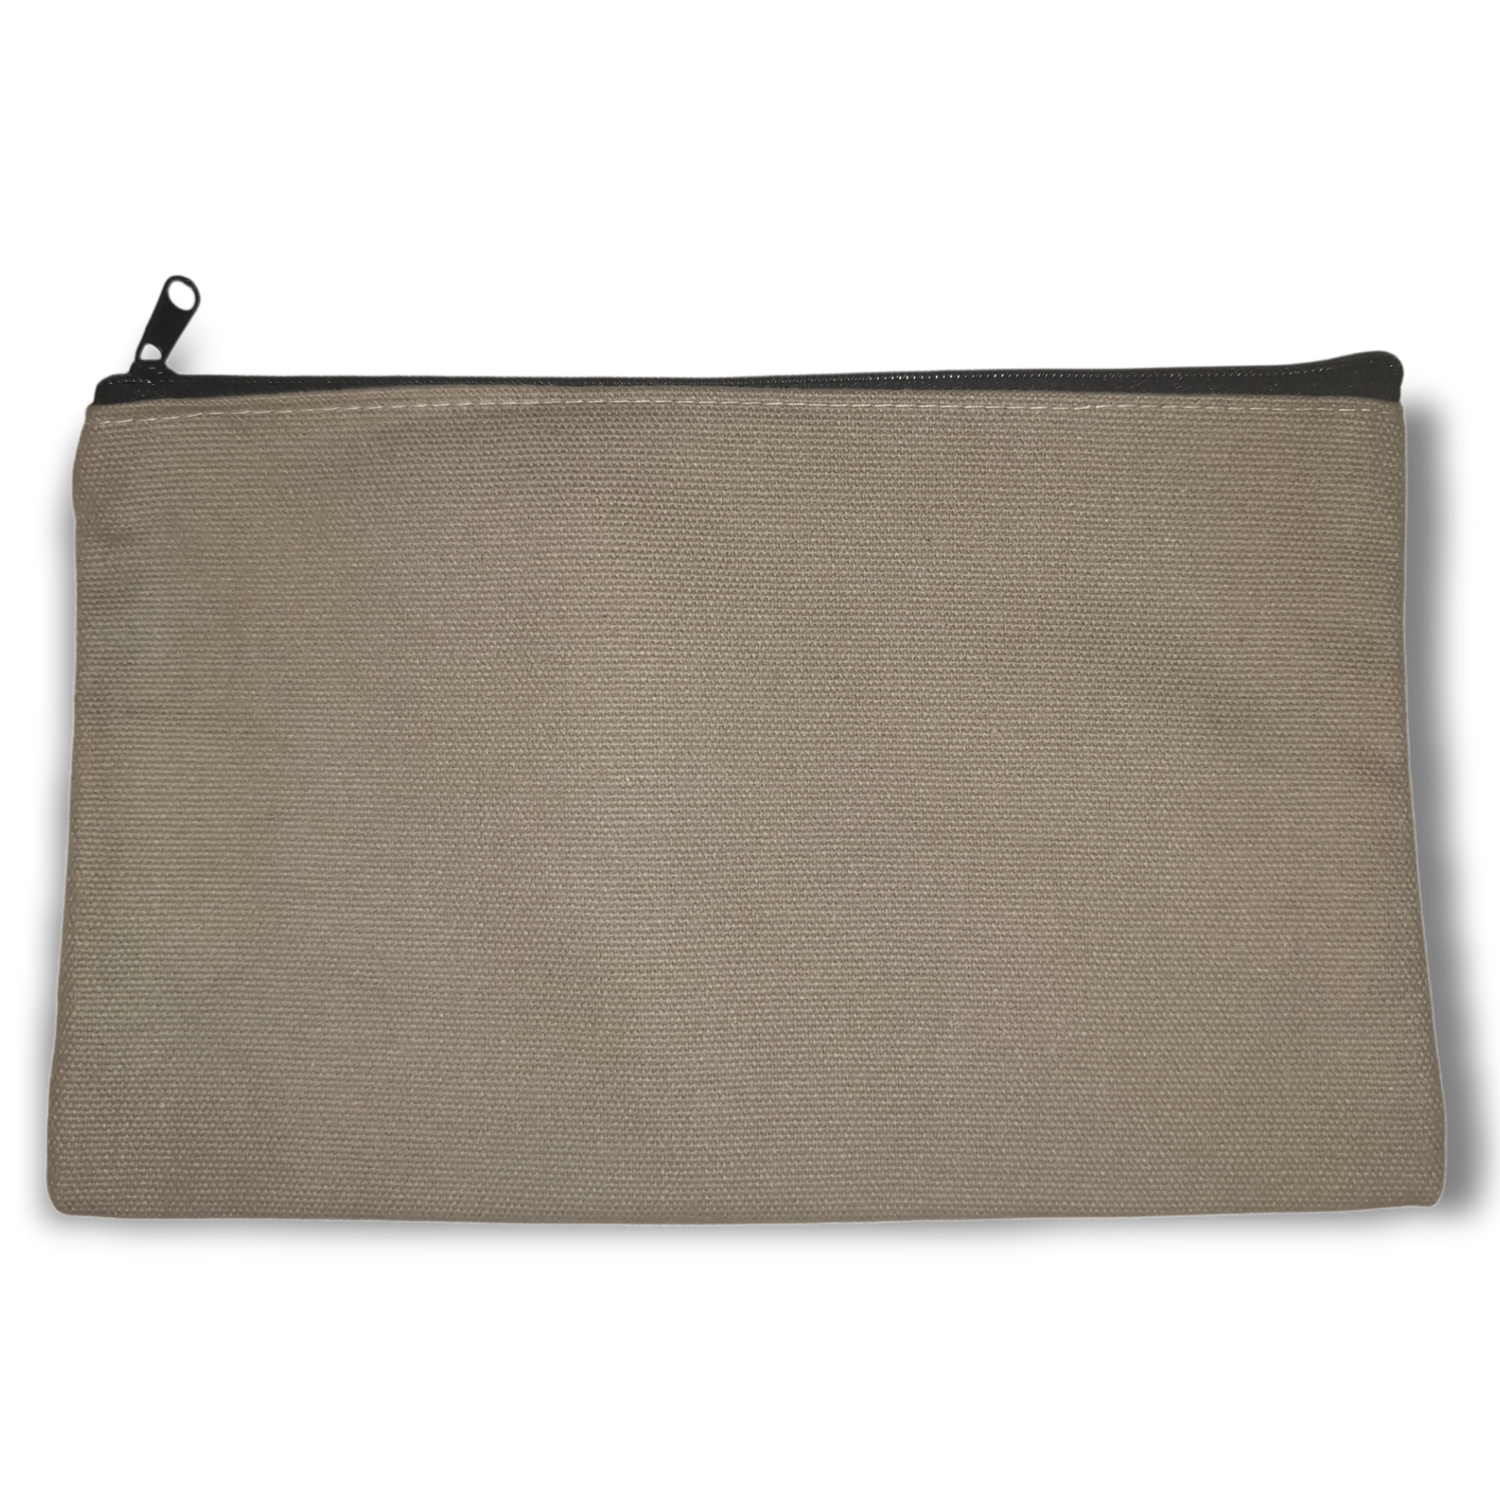 Design Your Own Blank Canvas Zip Bag - Grey 21 x 13 cm Approx. A5